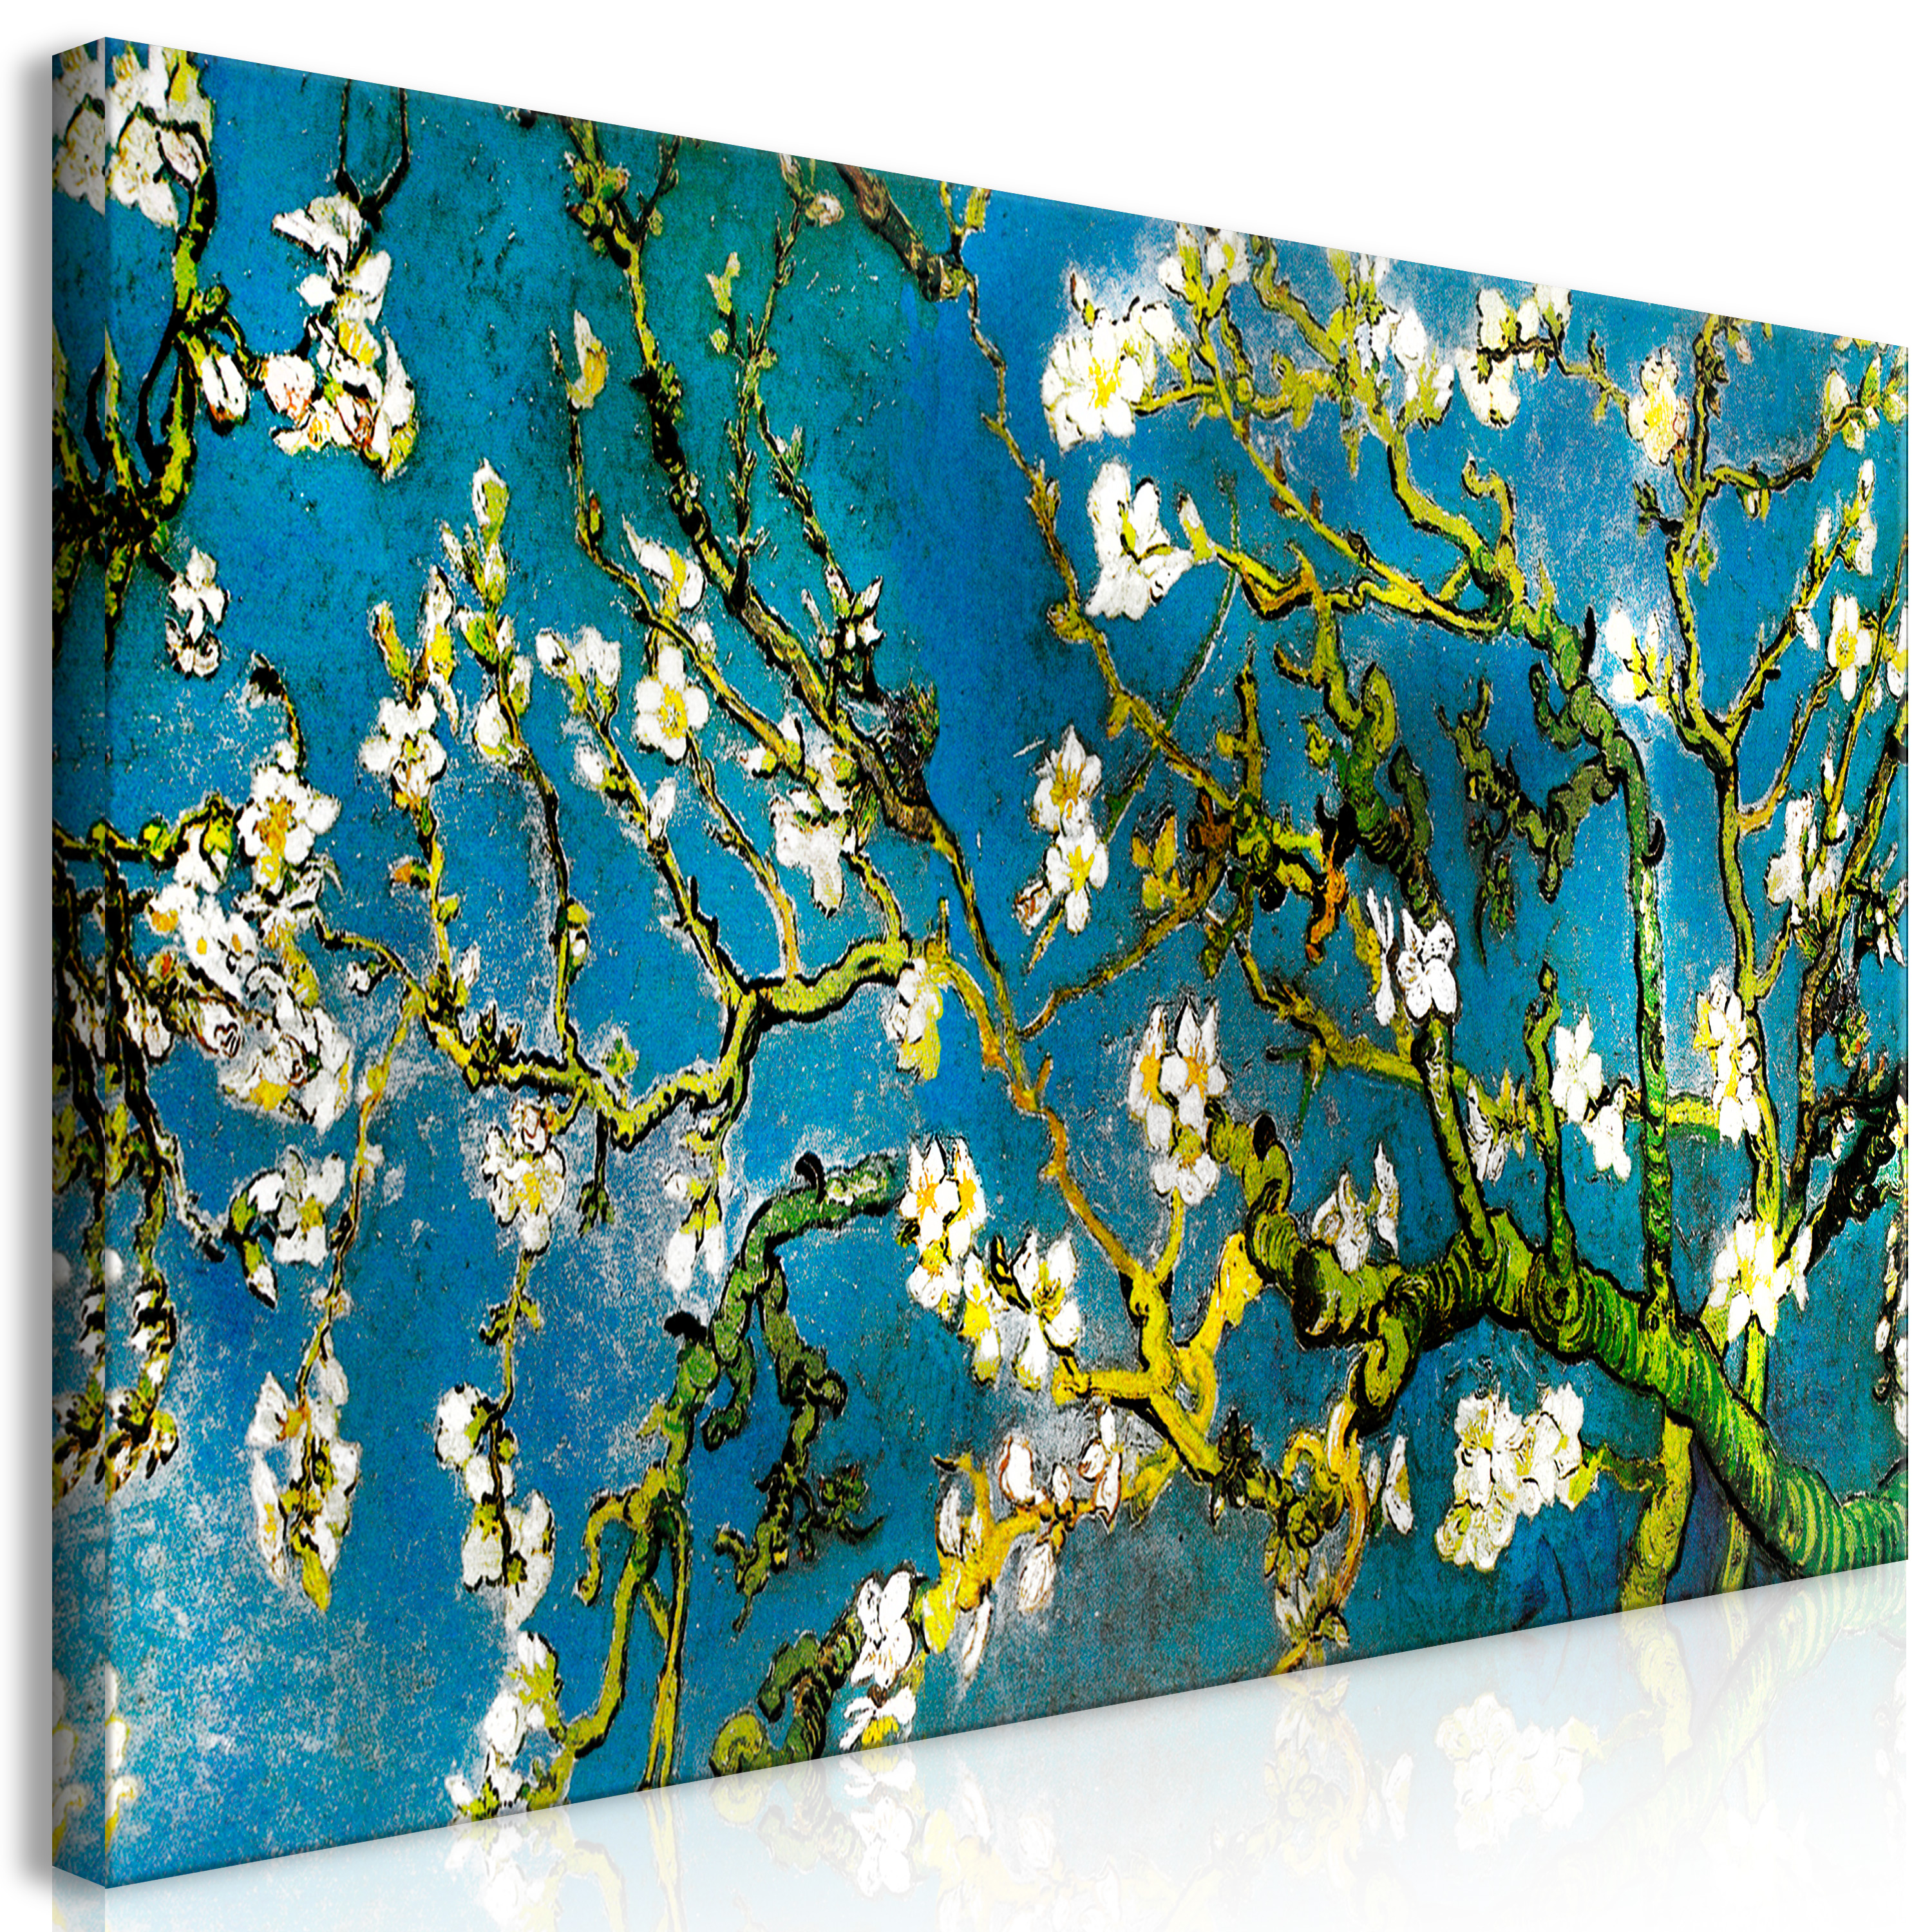 Canvas Print - Blooming Almond (1 Part) Wide - 70x35